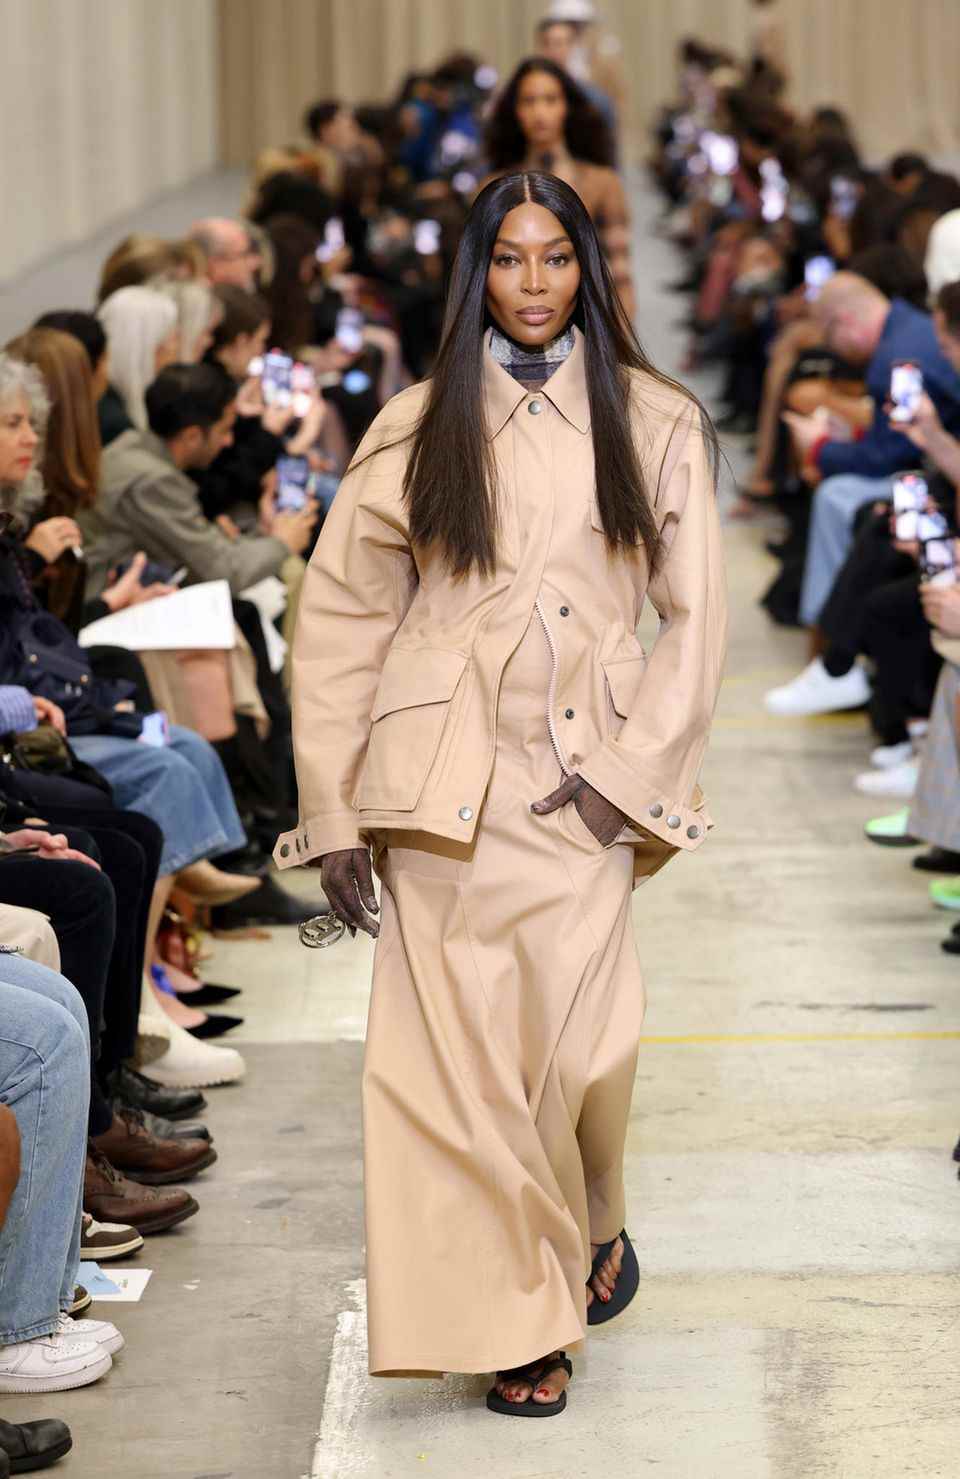 Naomi Campbell at the Burberry Show in September